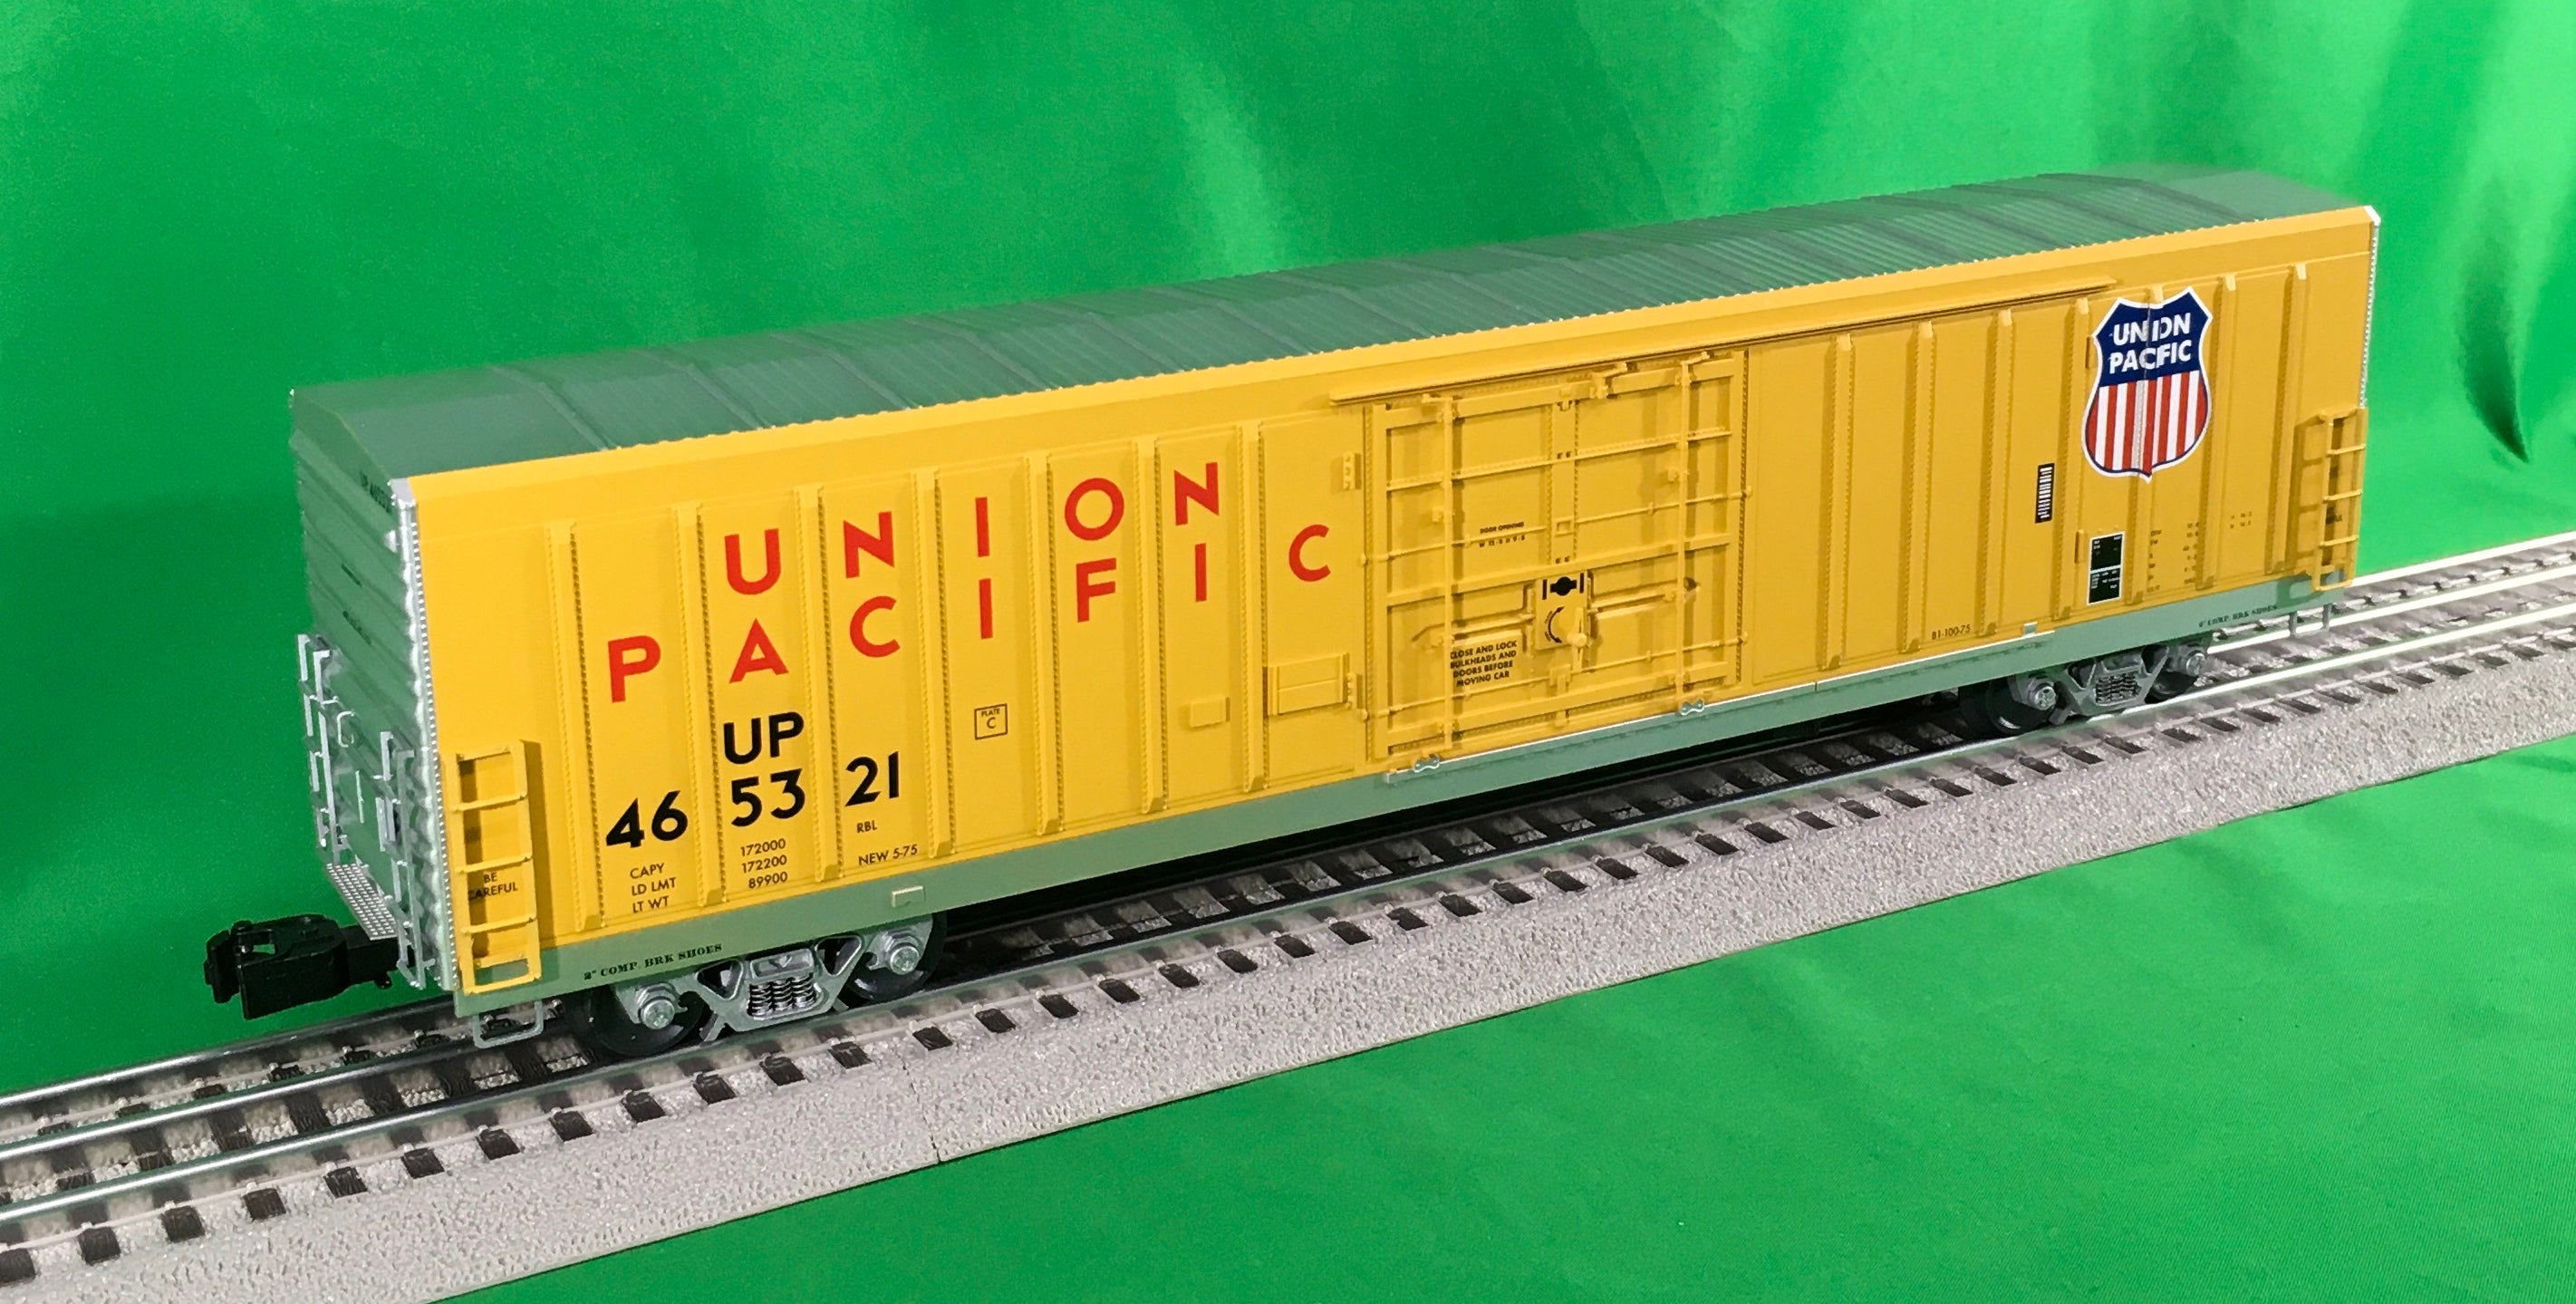 Lionel 2126472 - Beer Car "Union Pacific" #465321